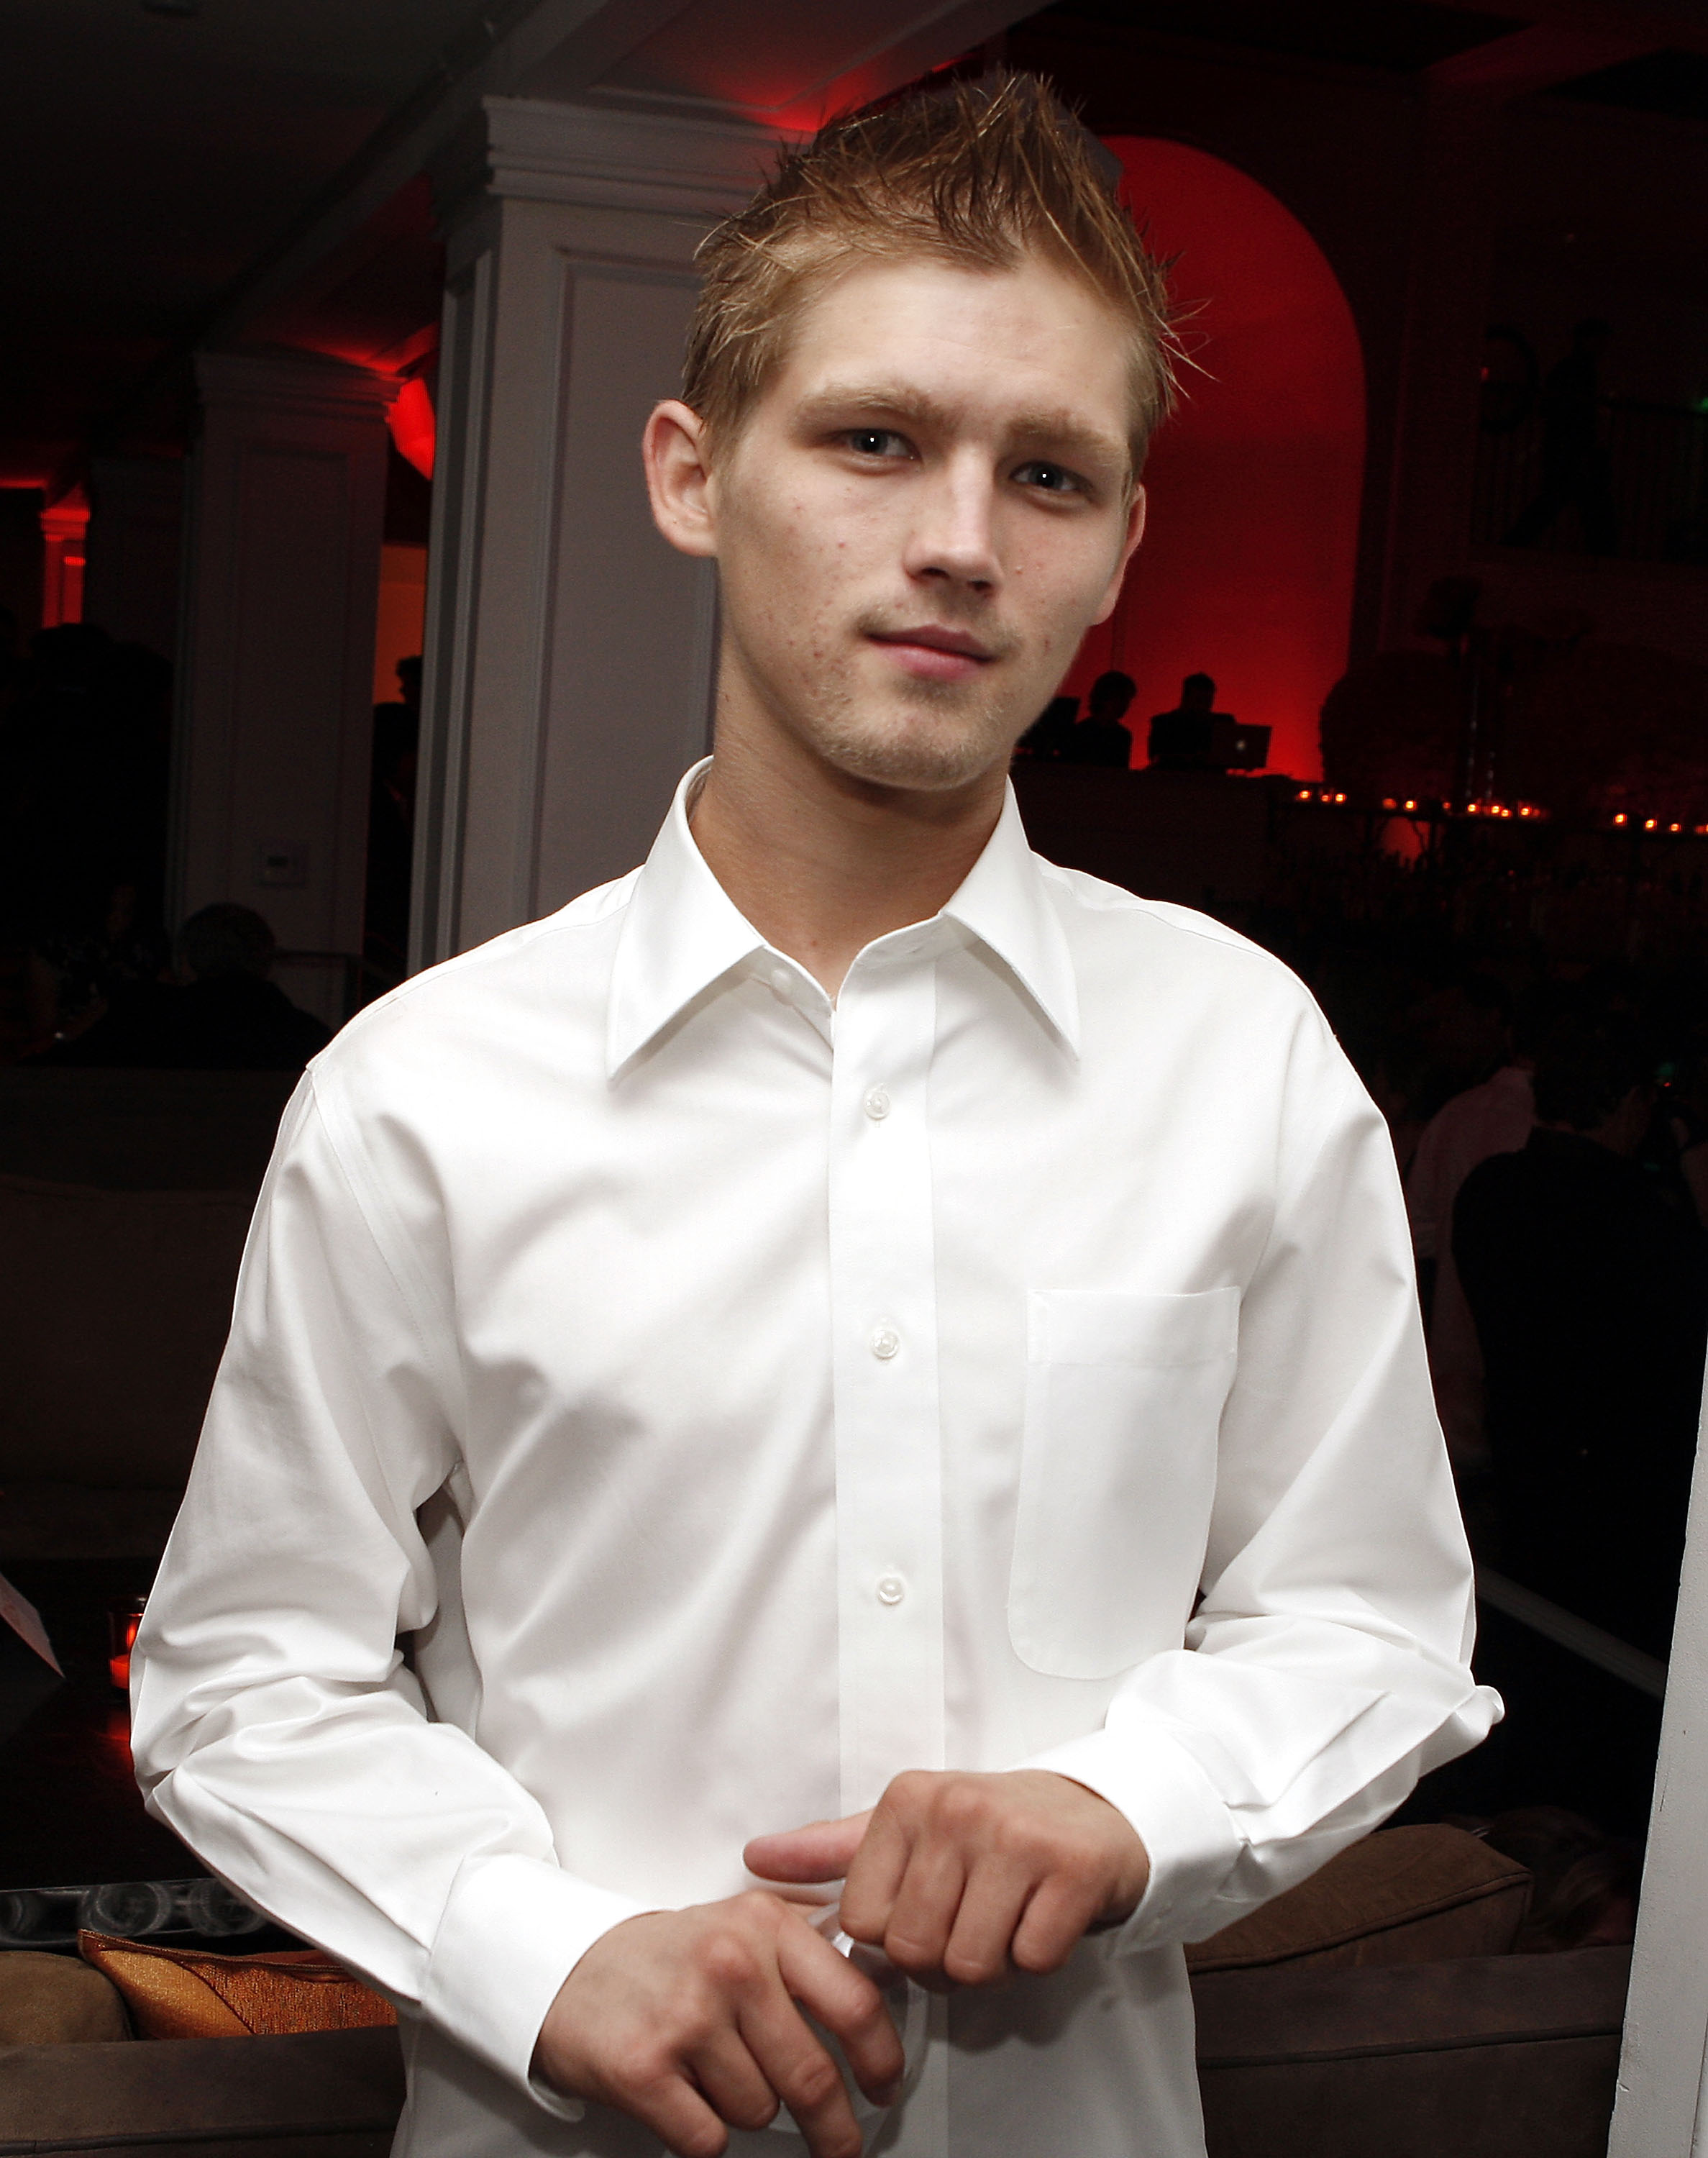 Evan Ellingson at the CW/Showtime/CBS Television TCA Party in Los Angeles, California on July 18, 2008. | Source: Getty Images